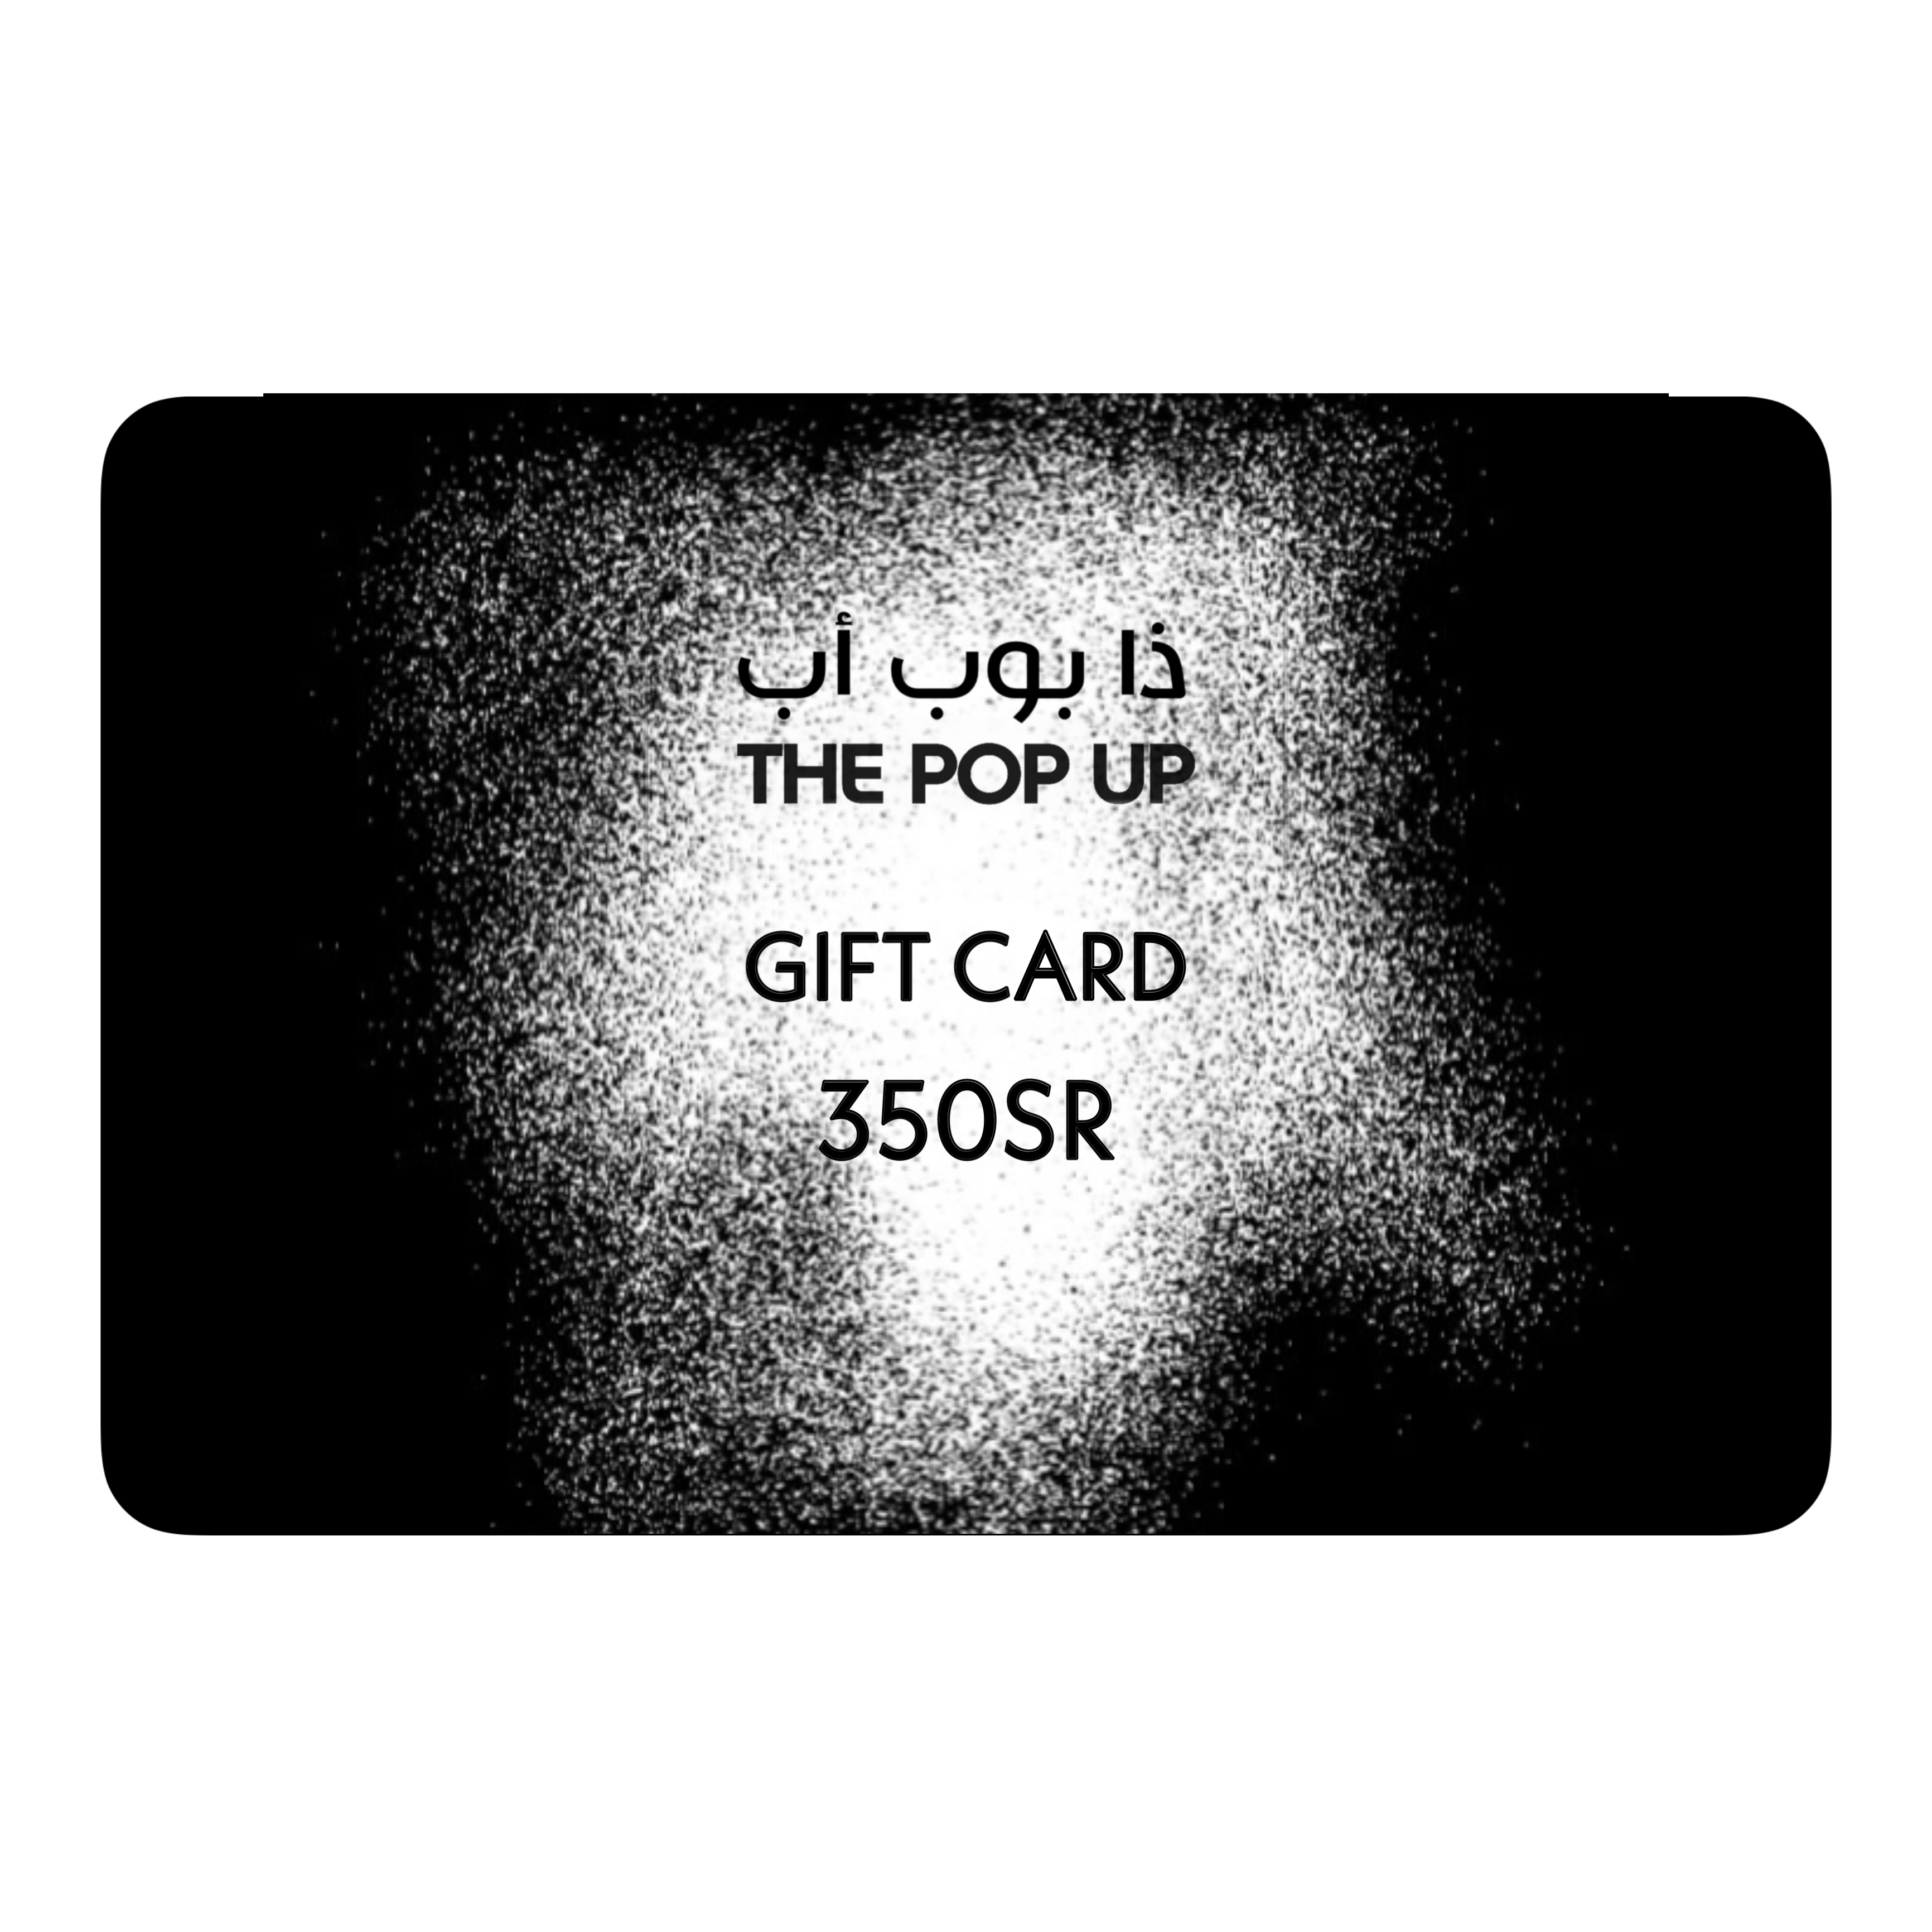 THE POP UP GIFT CARD